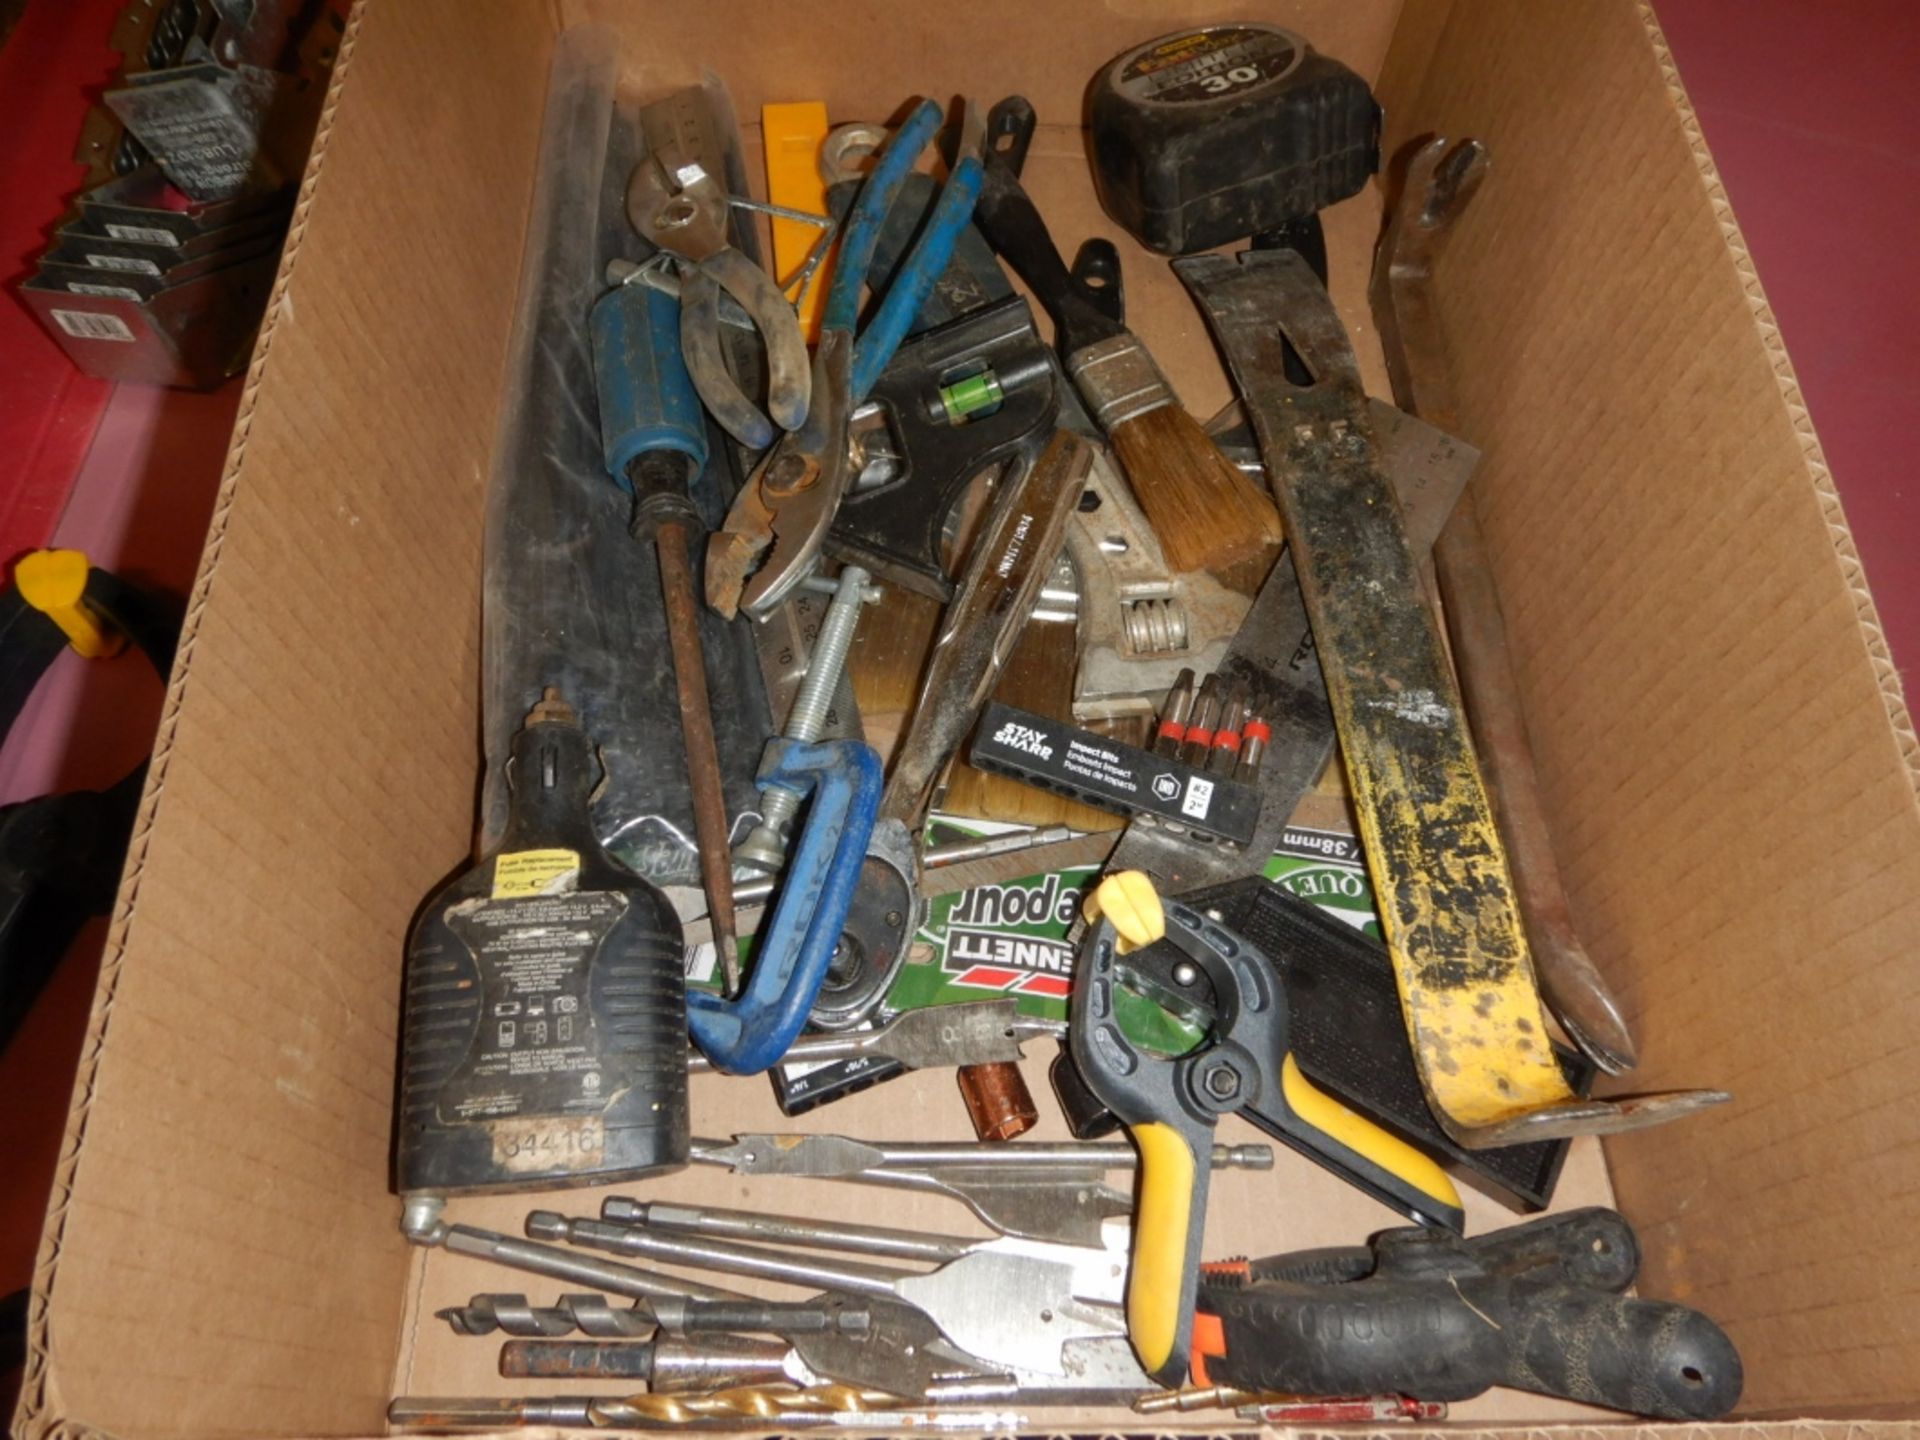 L/O ASSORTED CARPENTER TOOLS, HAND CLAMPS, DRILL BITS, SCREW DRIVER BITS, TAPE MEASURES, CORDS, - Image 2 of 3